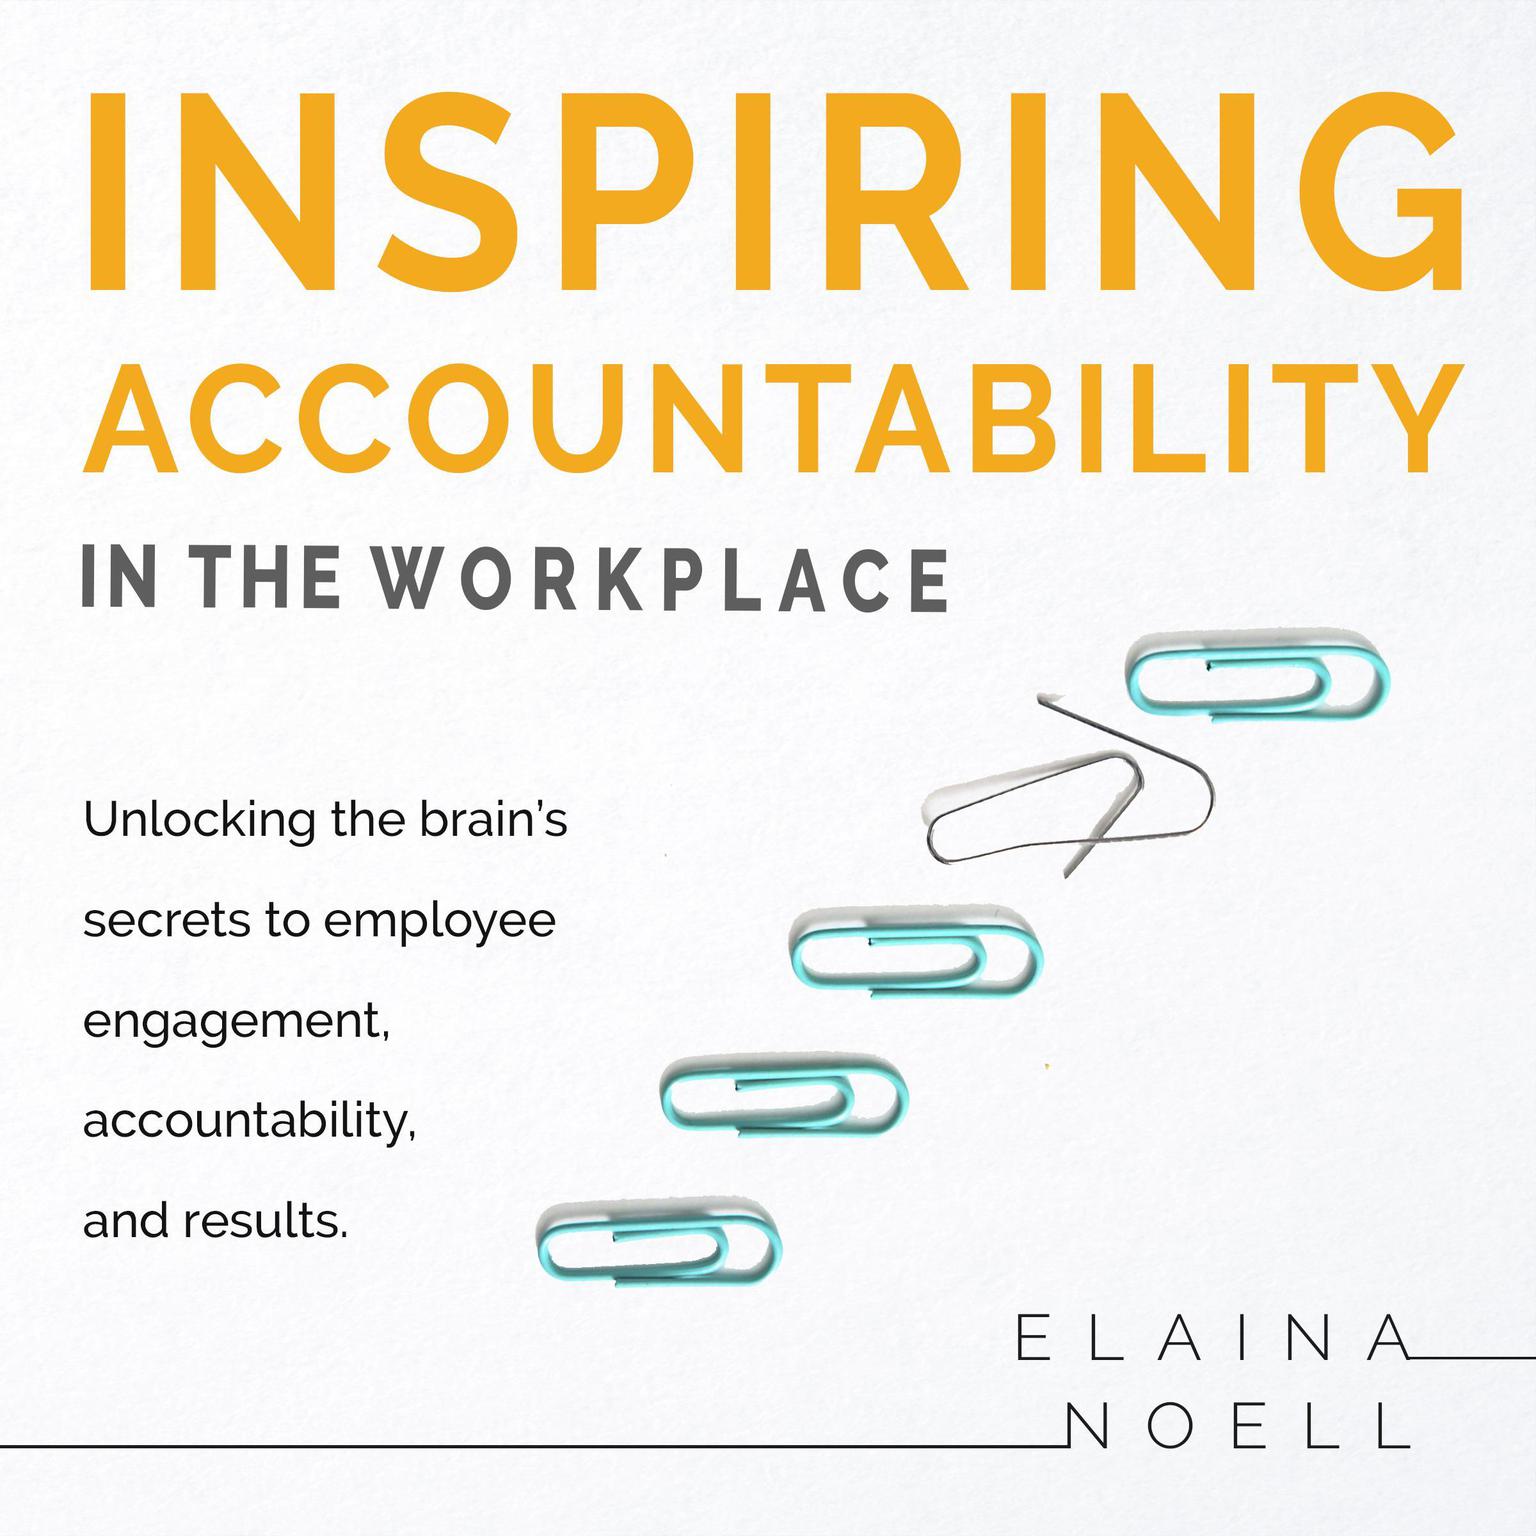 Inspiring Accountability in the Workplace - Unlocking the brains secrets to employee engagement, accountability, and results: Unlocking the Brain’s Secrets to Employee Engagement, Accountability, and Results Audiobook, by Elaina Noell